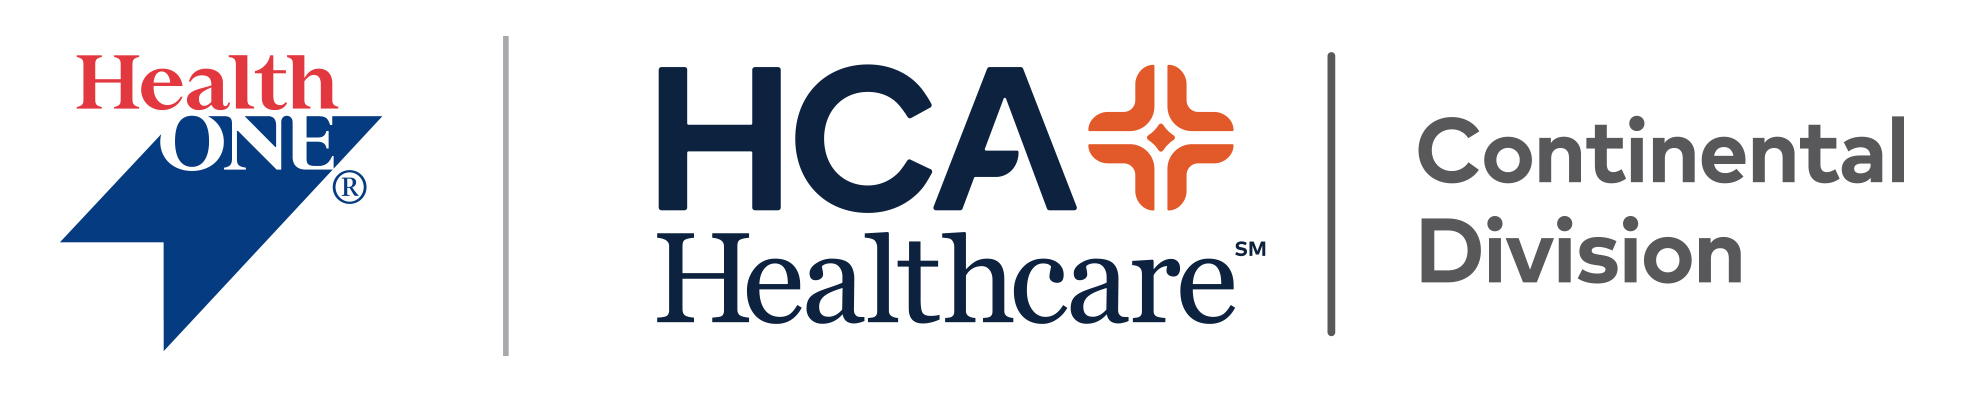 Logos for HealthONE and HCA Healthcare Continental Division